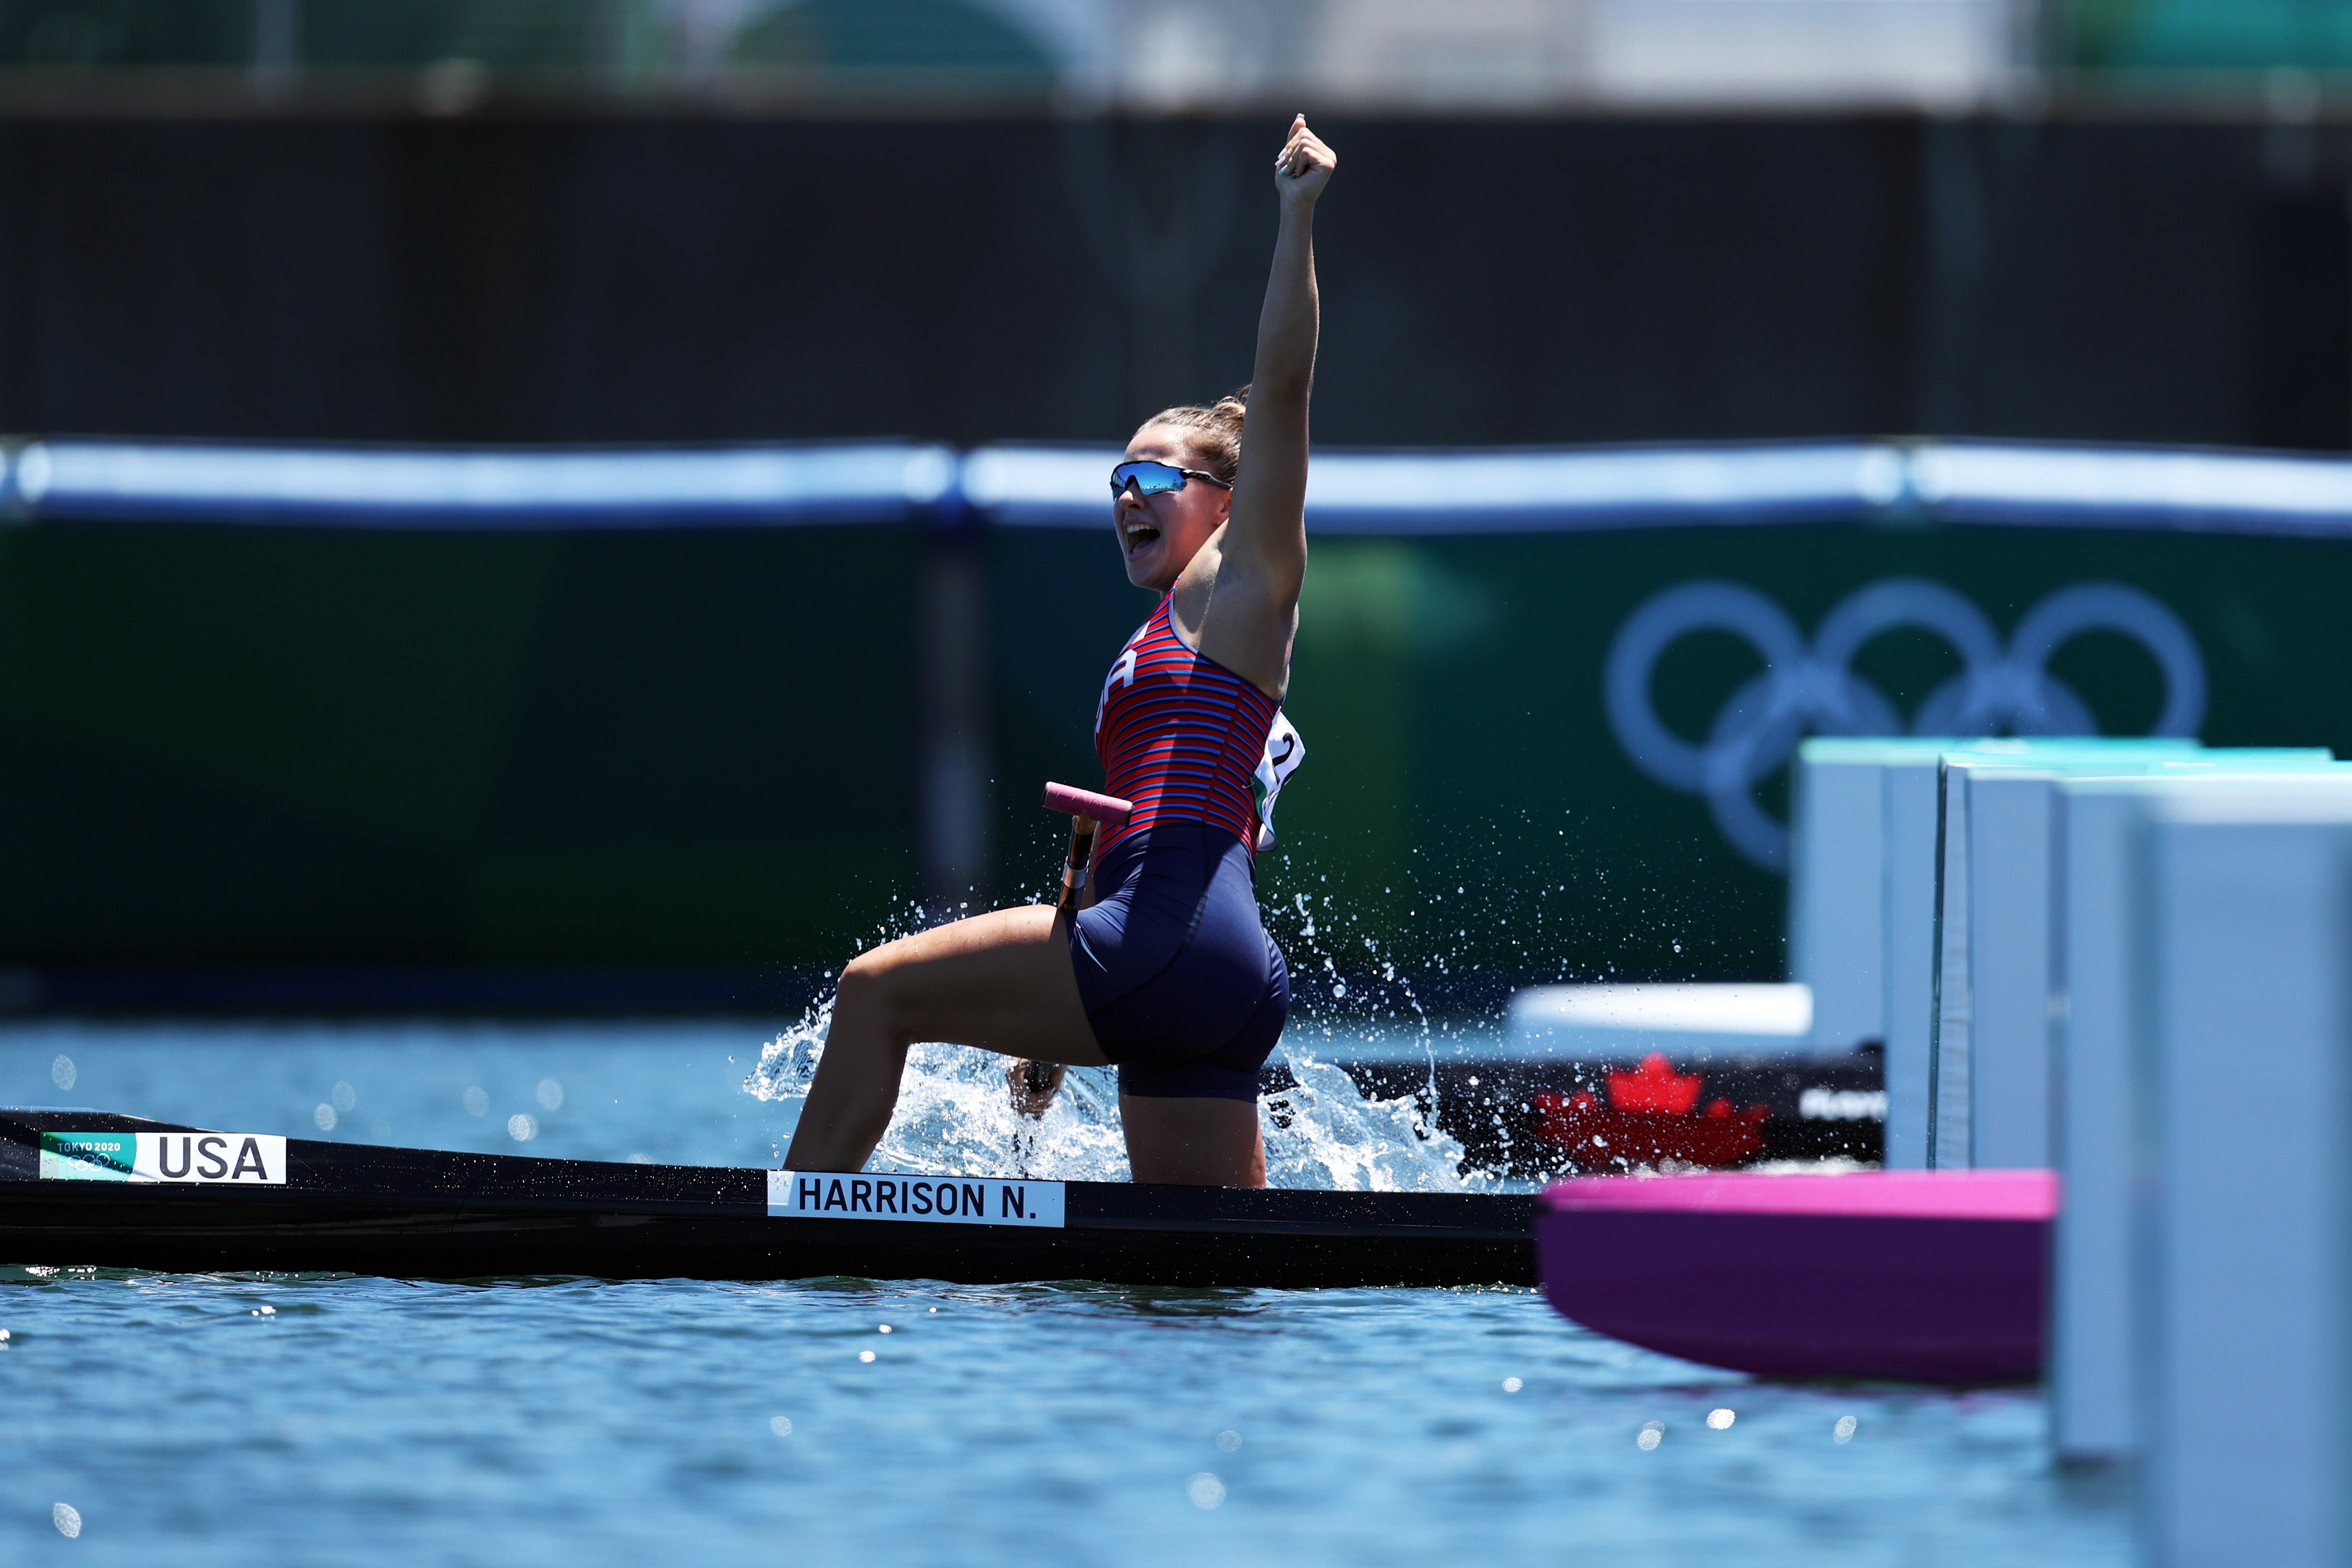 Nevin Harrison of Team United States reacts to winning the gold medal in the Women's Canoe Single 200m Final A on day thirteen of the Tokyo 2020 Olympic Games at Sea Forest Waterway on August 05, 2021 in Tokyo, Japan.